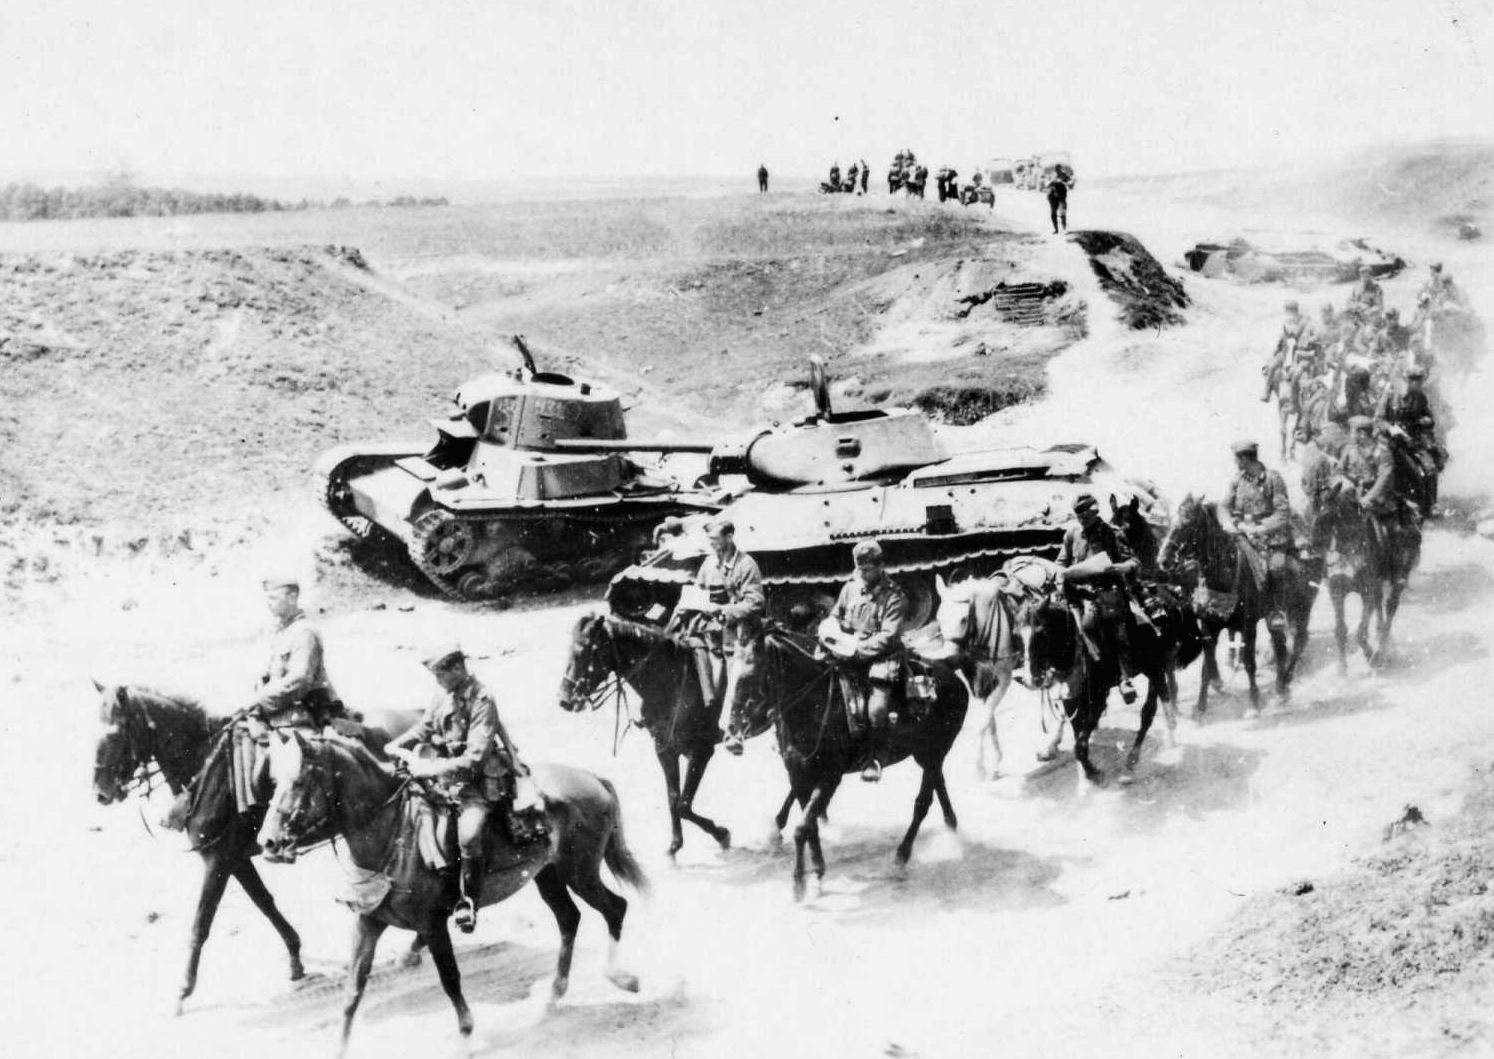 During the spectacularly successful Wehrmacht offensive of the summer of 1941, German mounted infantrymen advance past Soviet tanks that were knocked out in earlier combat. Later, the horses would suffer greatly during the terrible Russian winter. (National Archives)